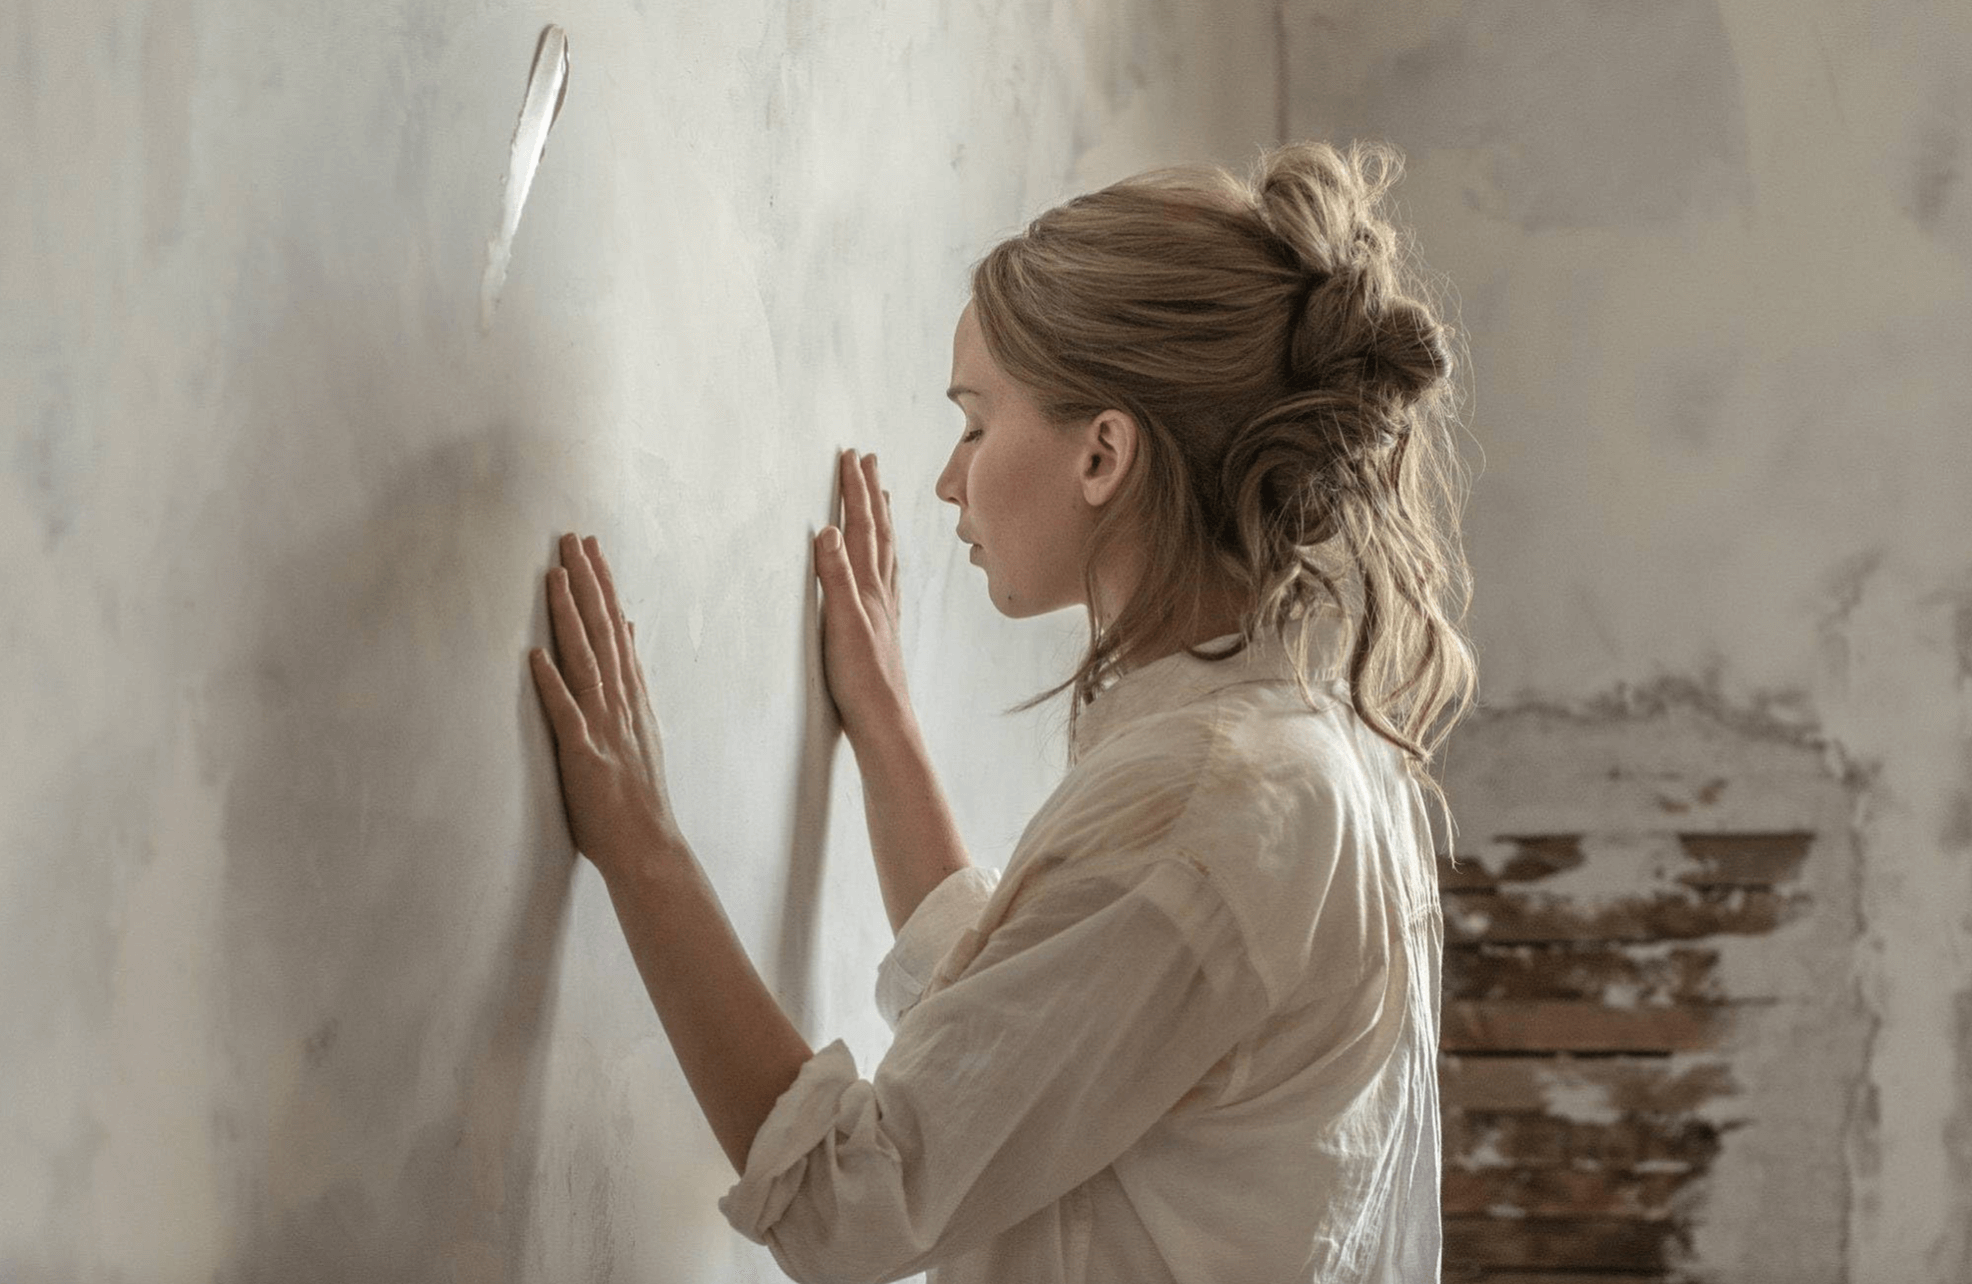 Jennifer Jennifer Lawrence as the title character in Mother! touching the wall with both hands and closing her eyes (IMDb)